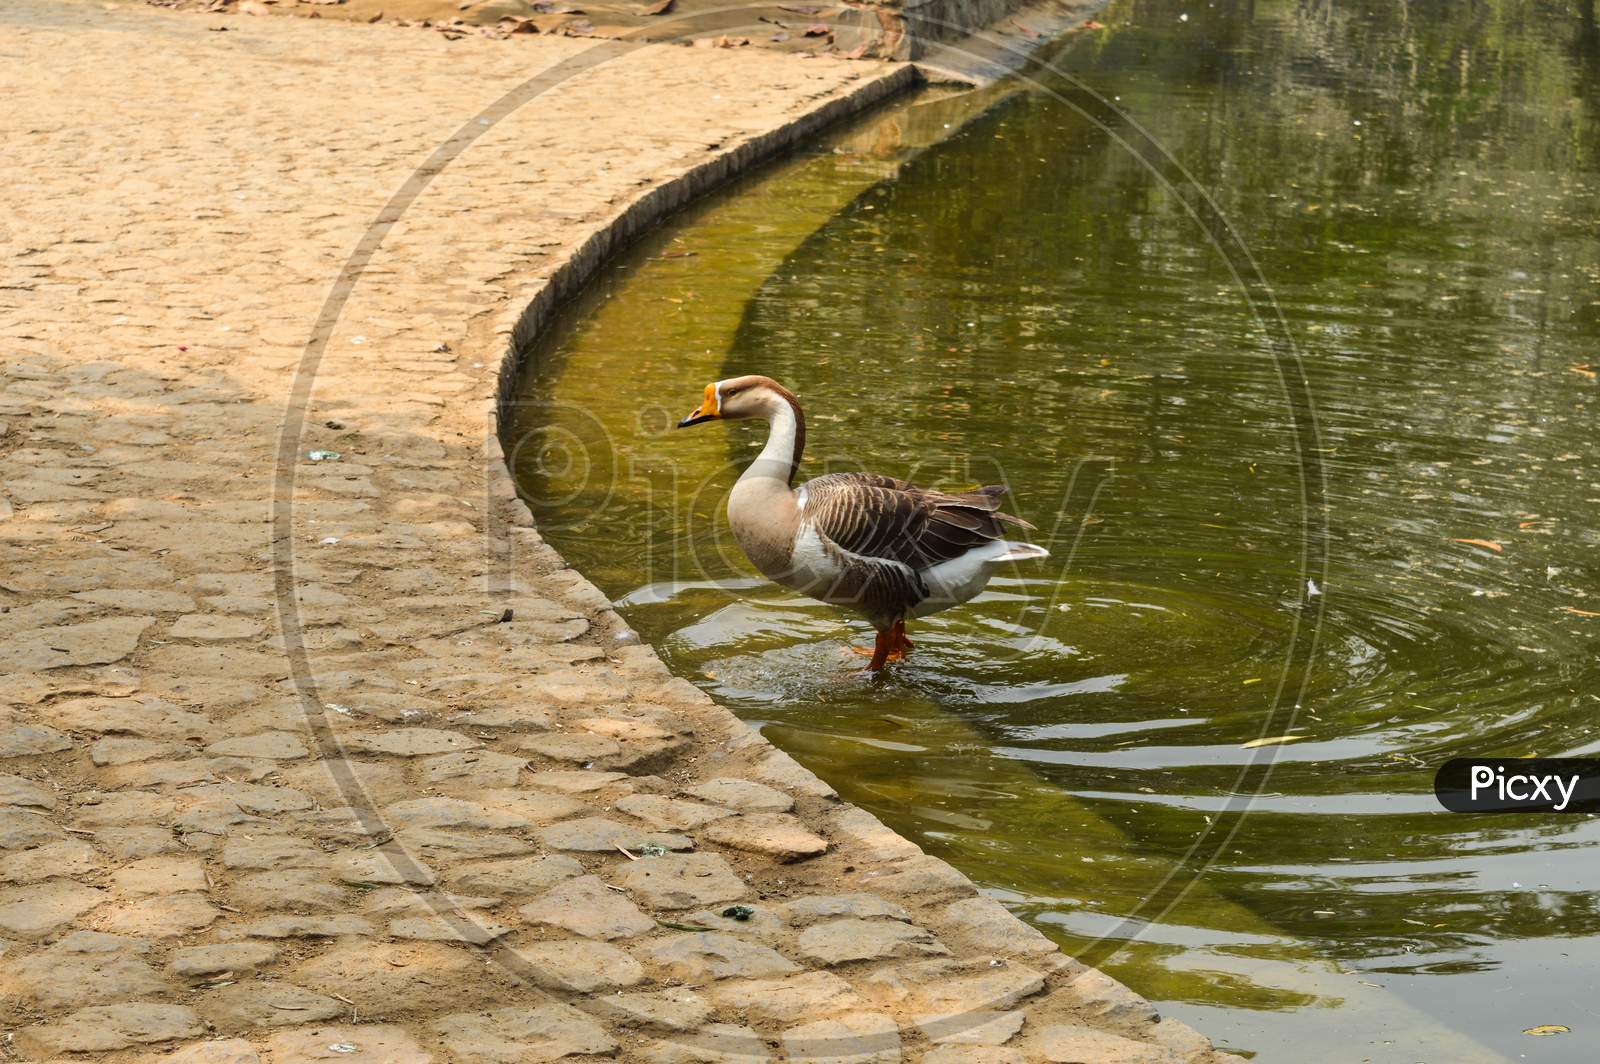 A Pair Of White Color Ducks Swimming,Drinking,Walking,Roaming Around Near By Pond At Garden, Lawn At Winter Foggy Morning.